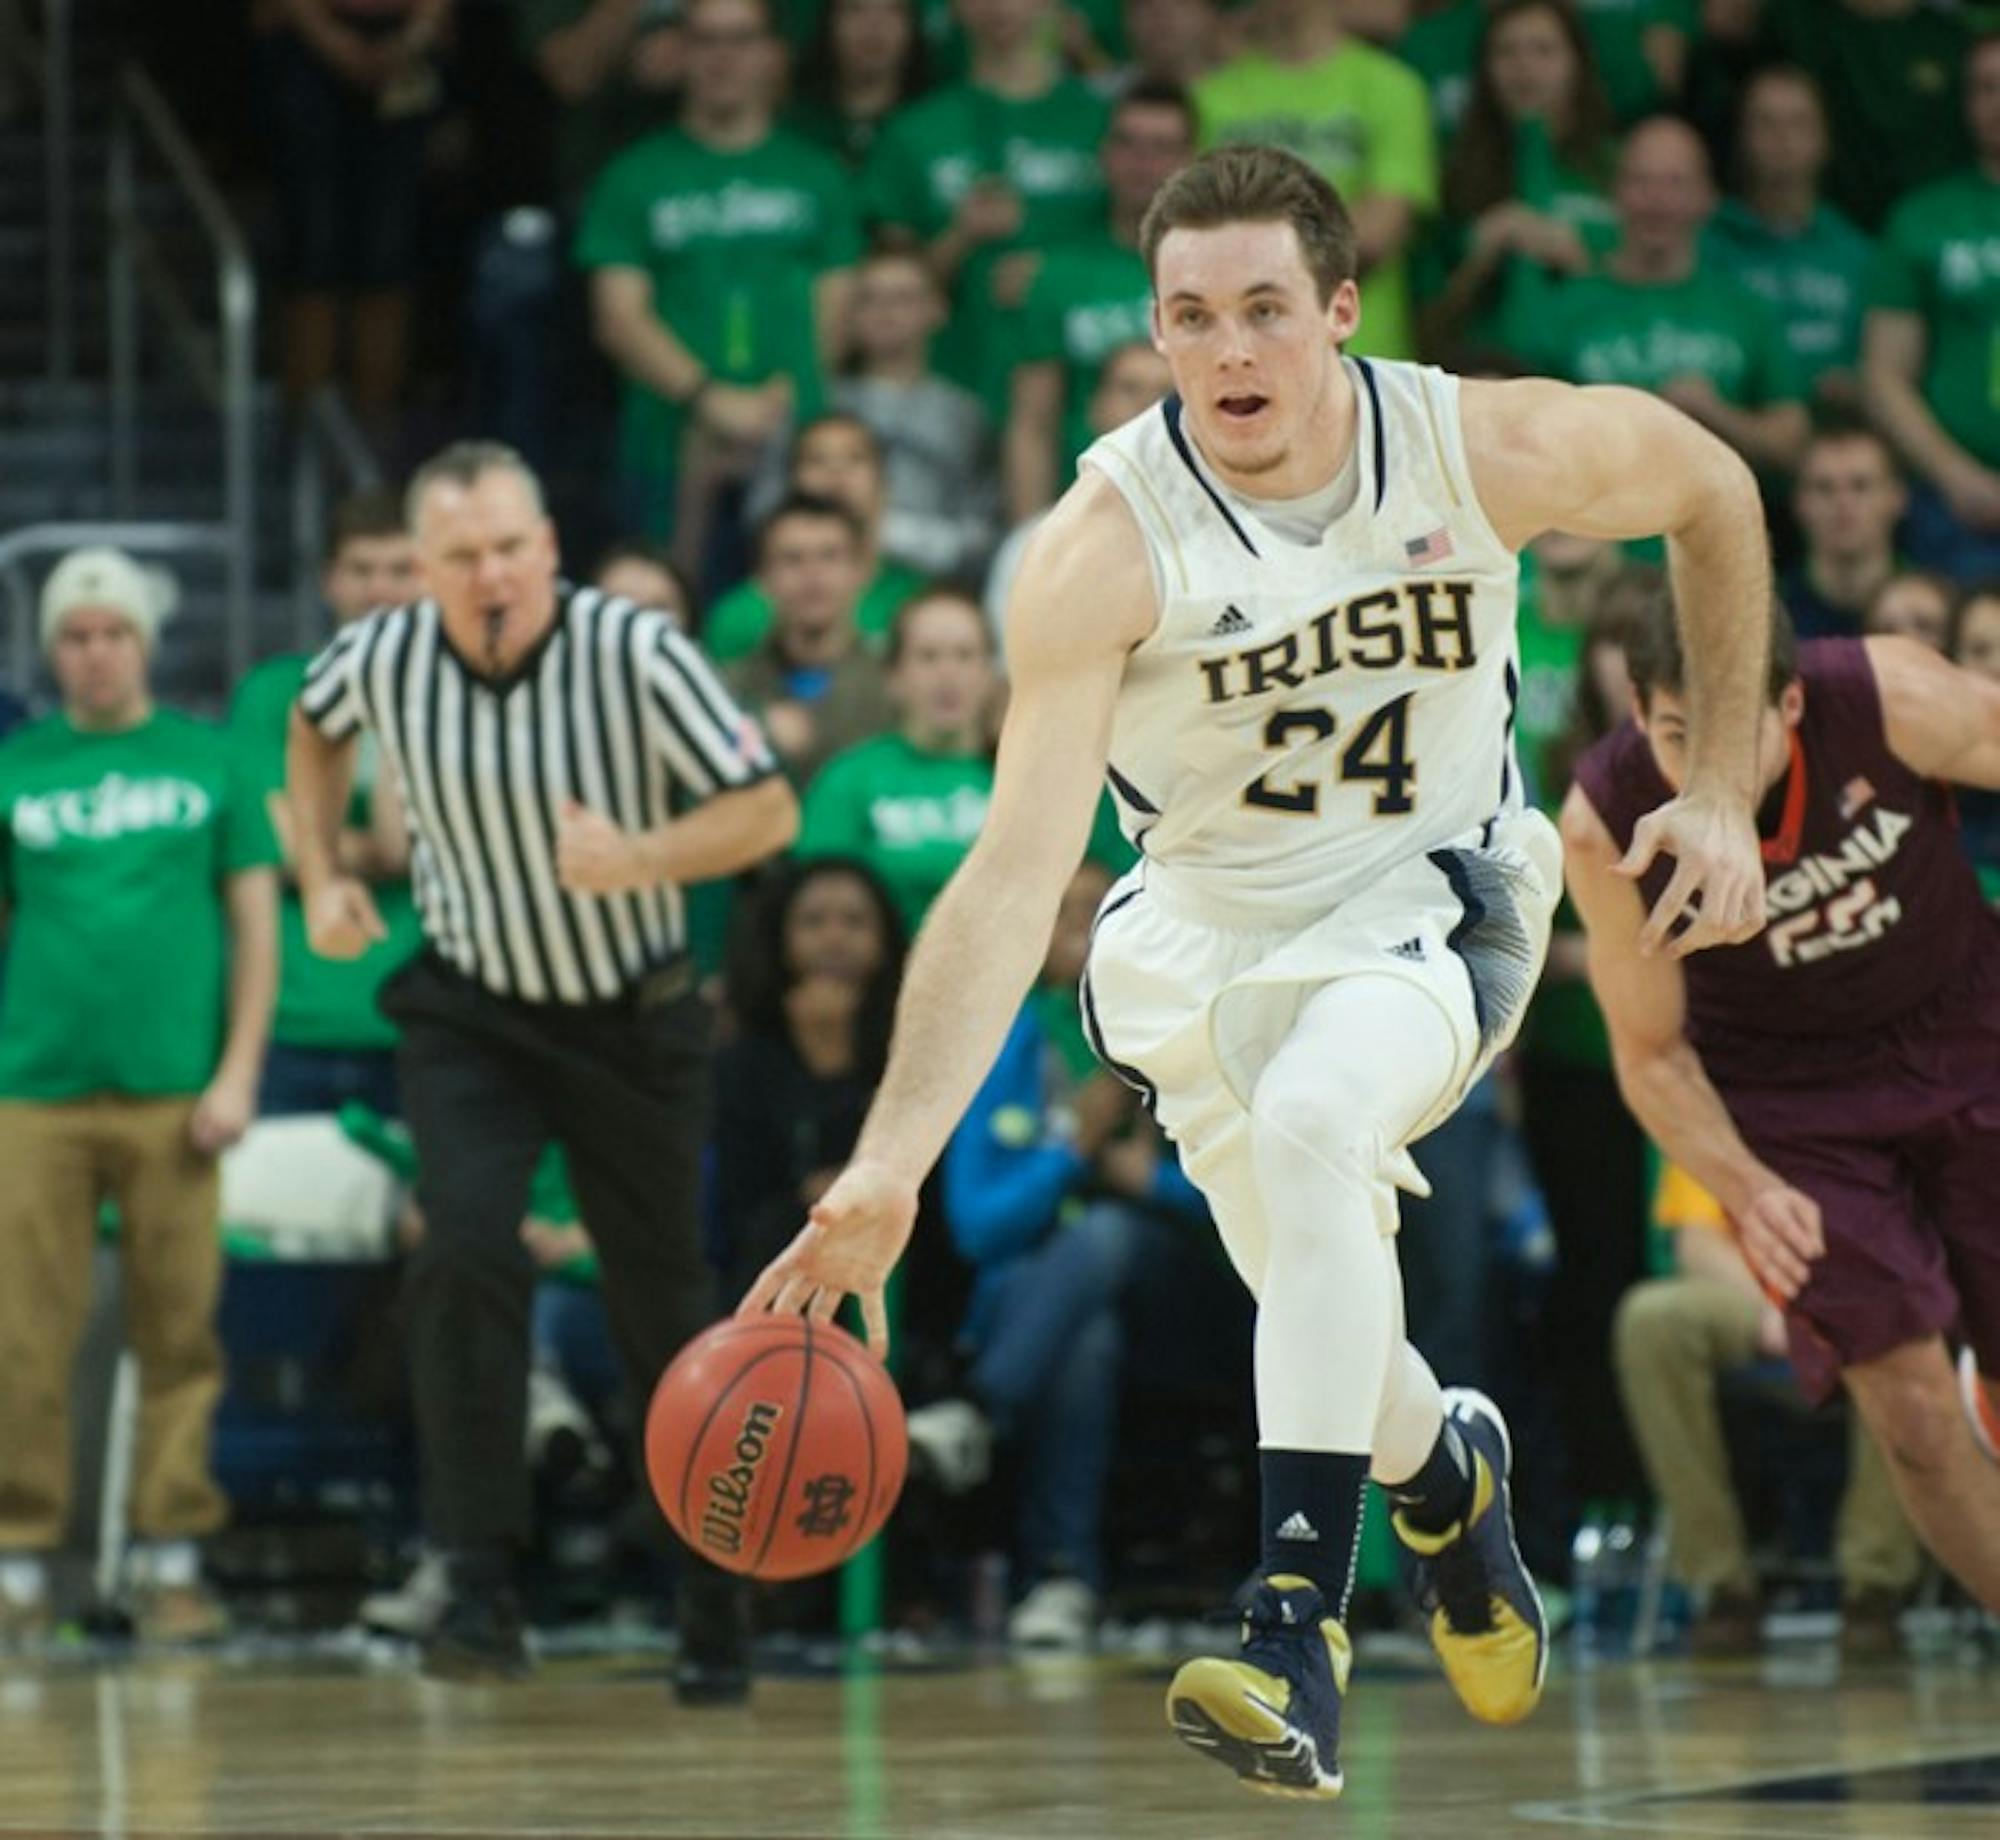 Irish junior guard/forward Pat Connaughton leads the break during Notre Dame’s 70-63 victory over Virginia Tech. Connaughton finished the game with 21 points and eight rebounds, while averaging 14.1 points per game and 7.3 rebounds per game this season.